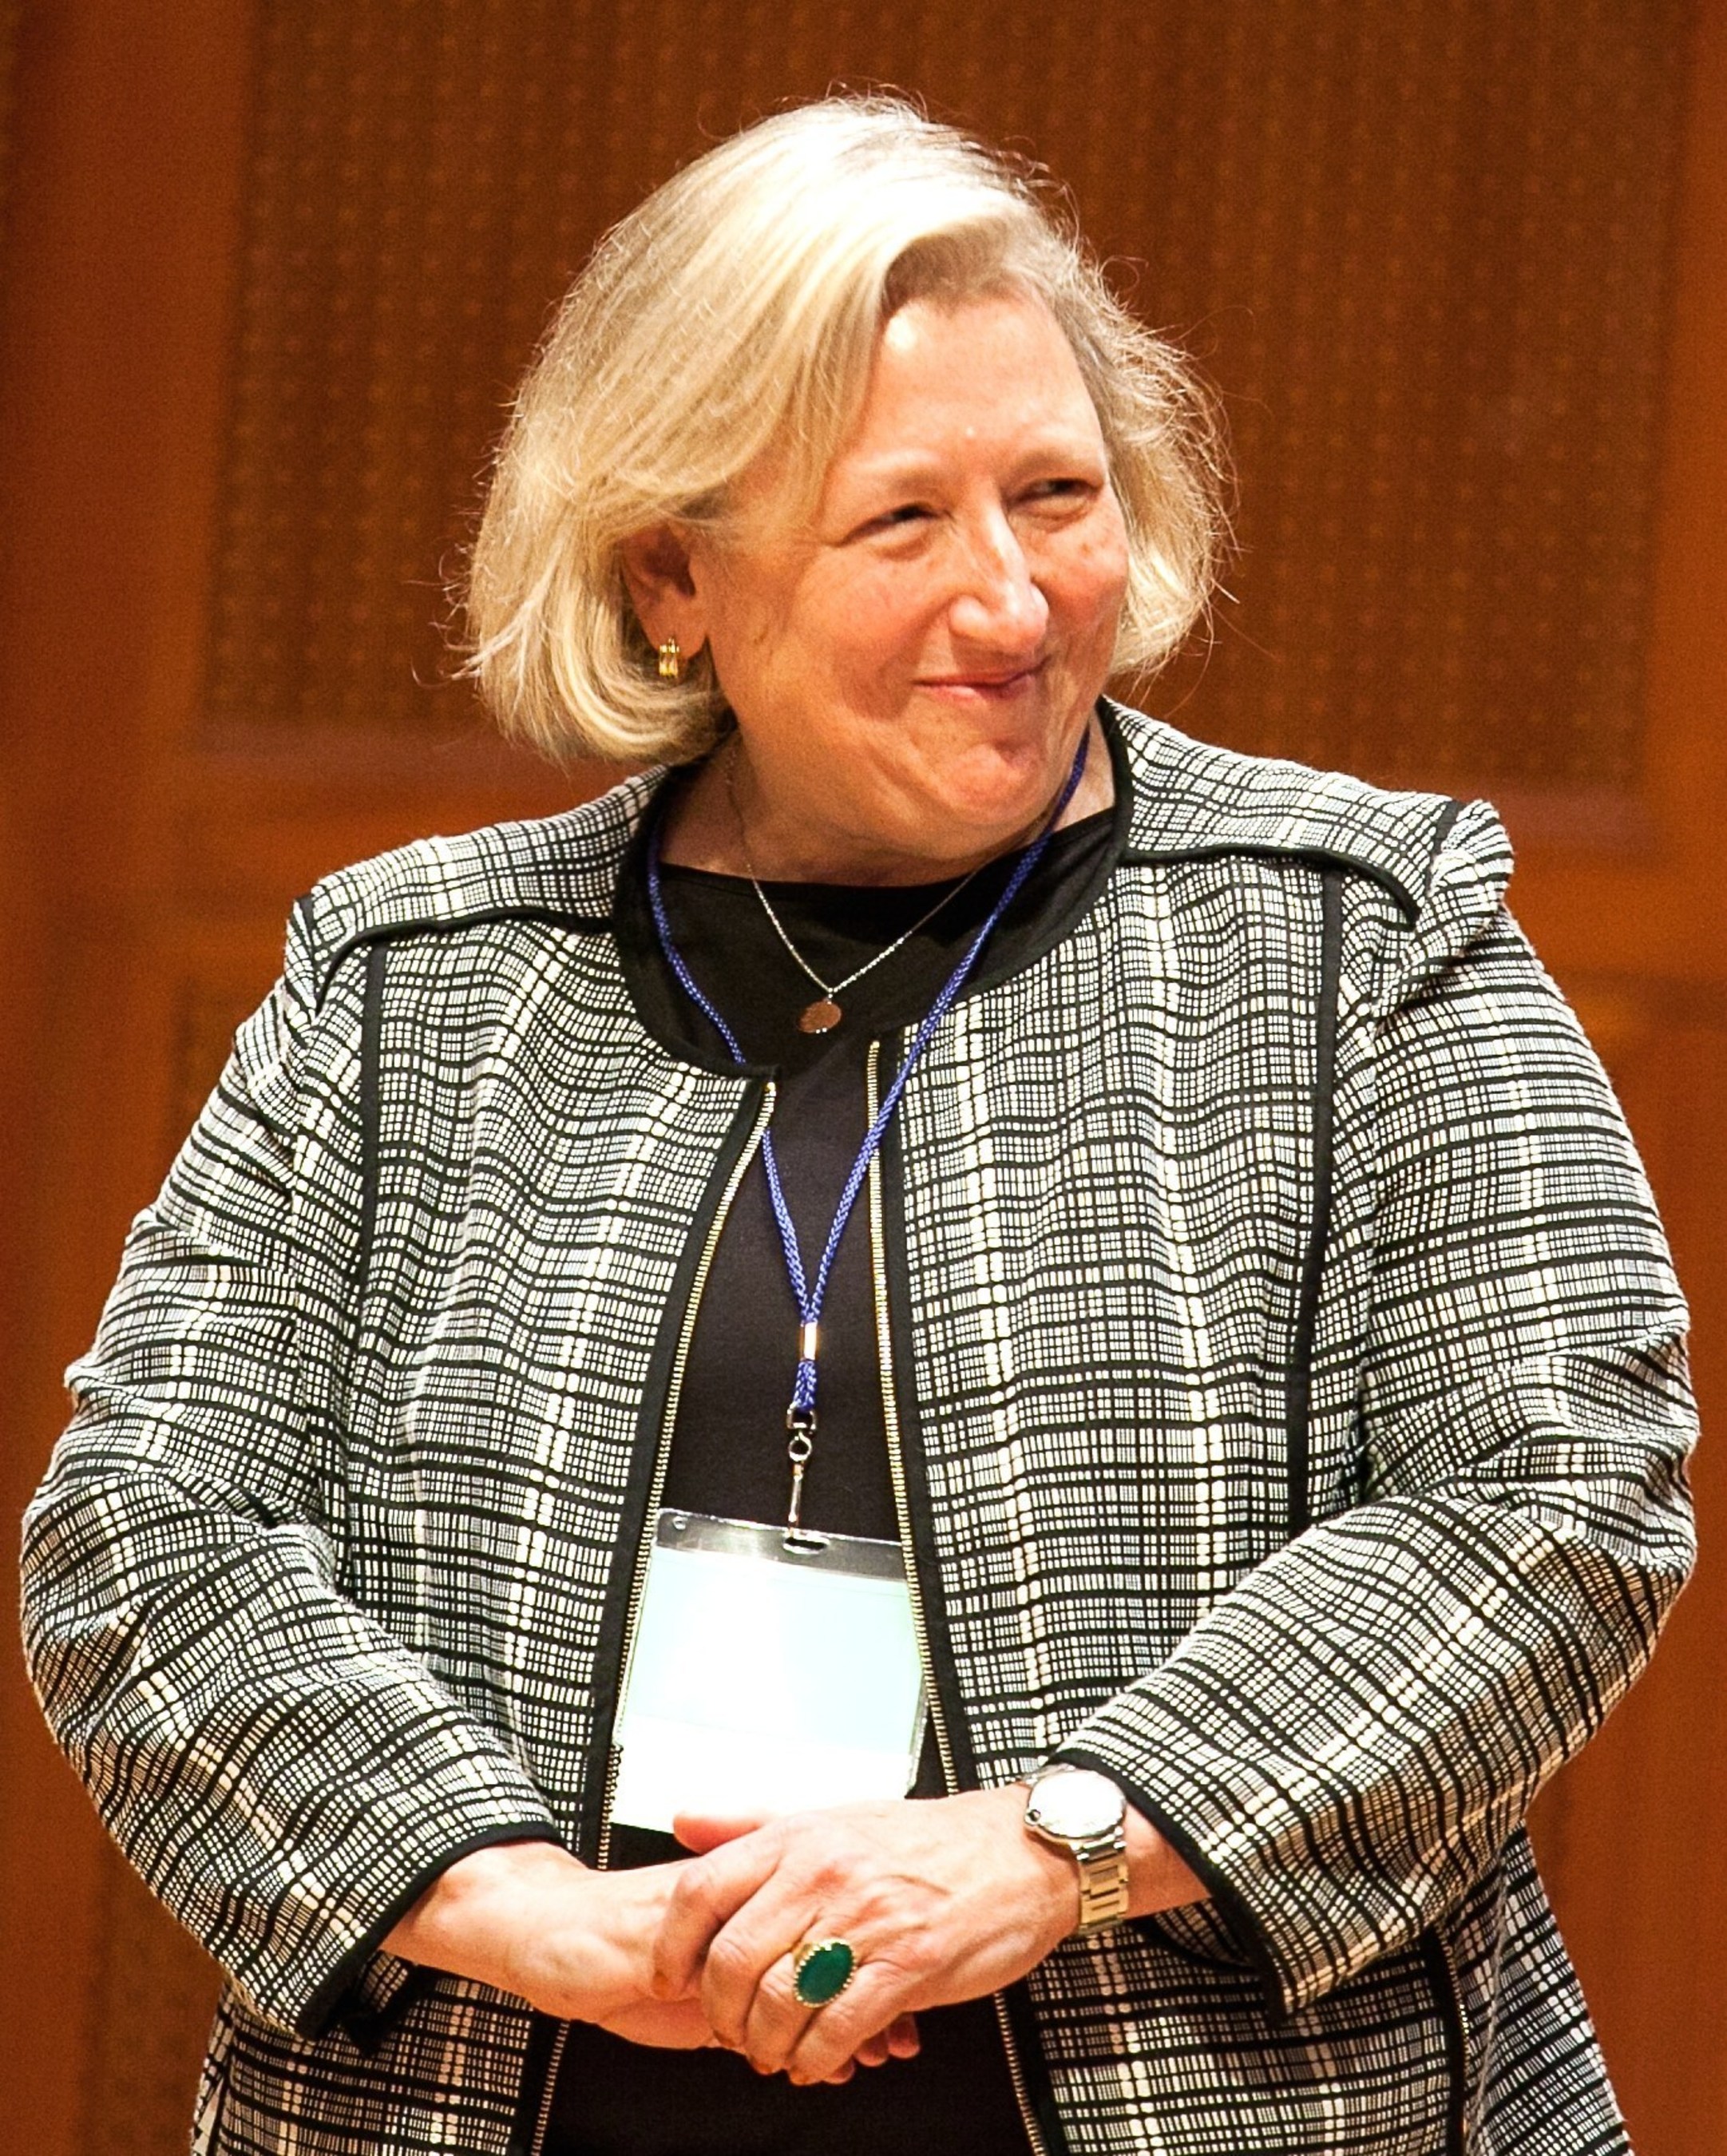 Dr. Joan Fallon, CEO and Founder of Curemark, LLC